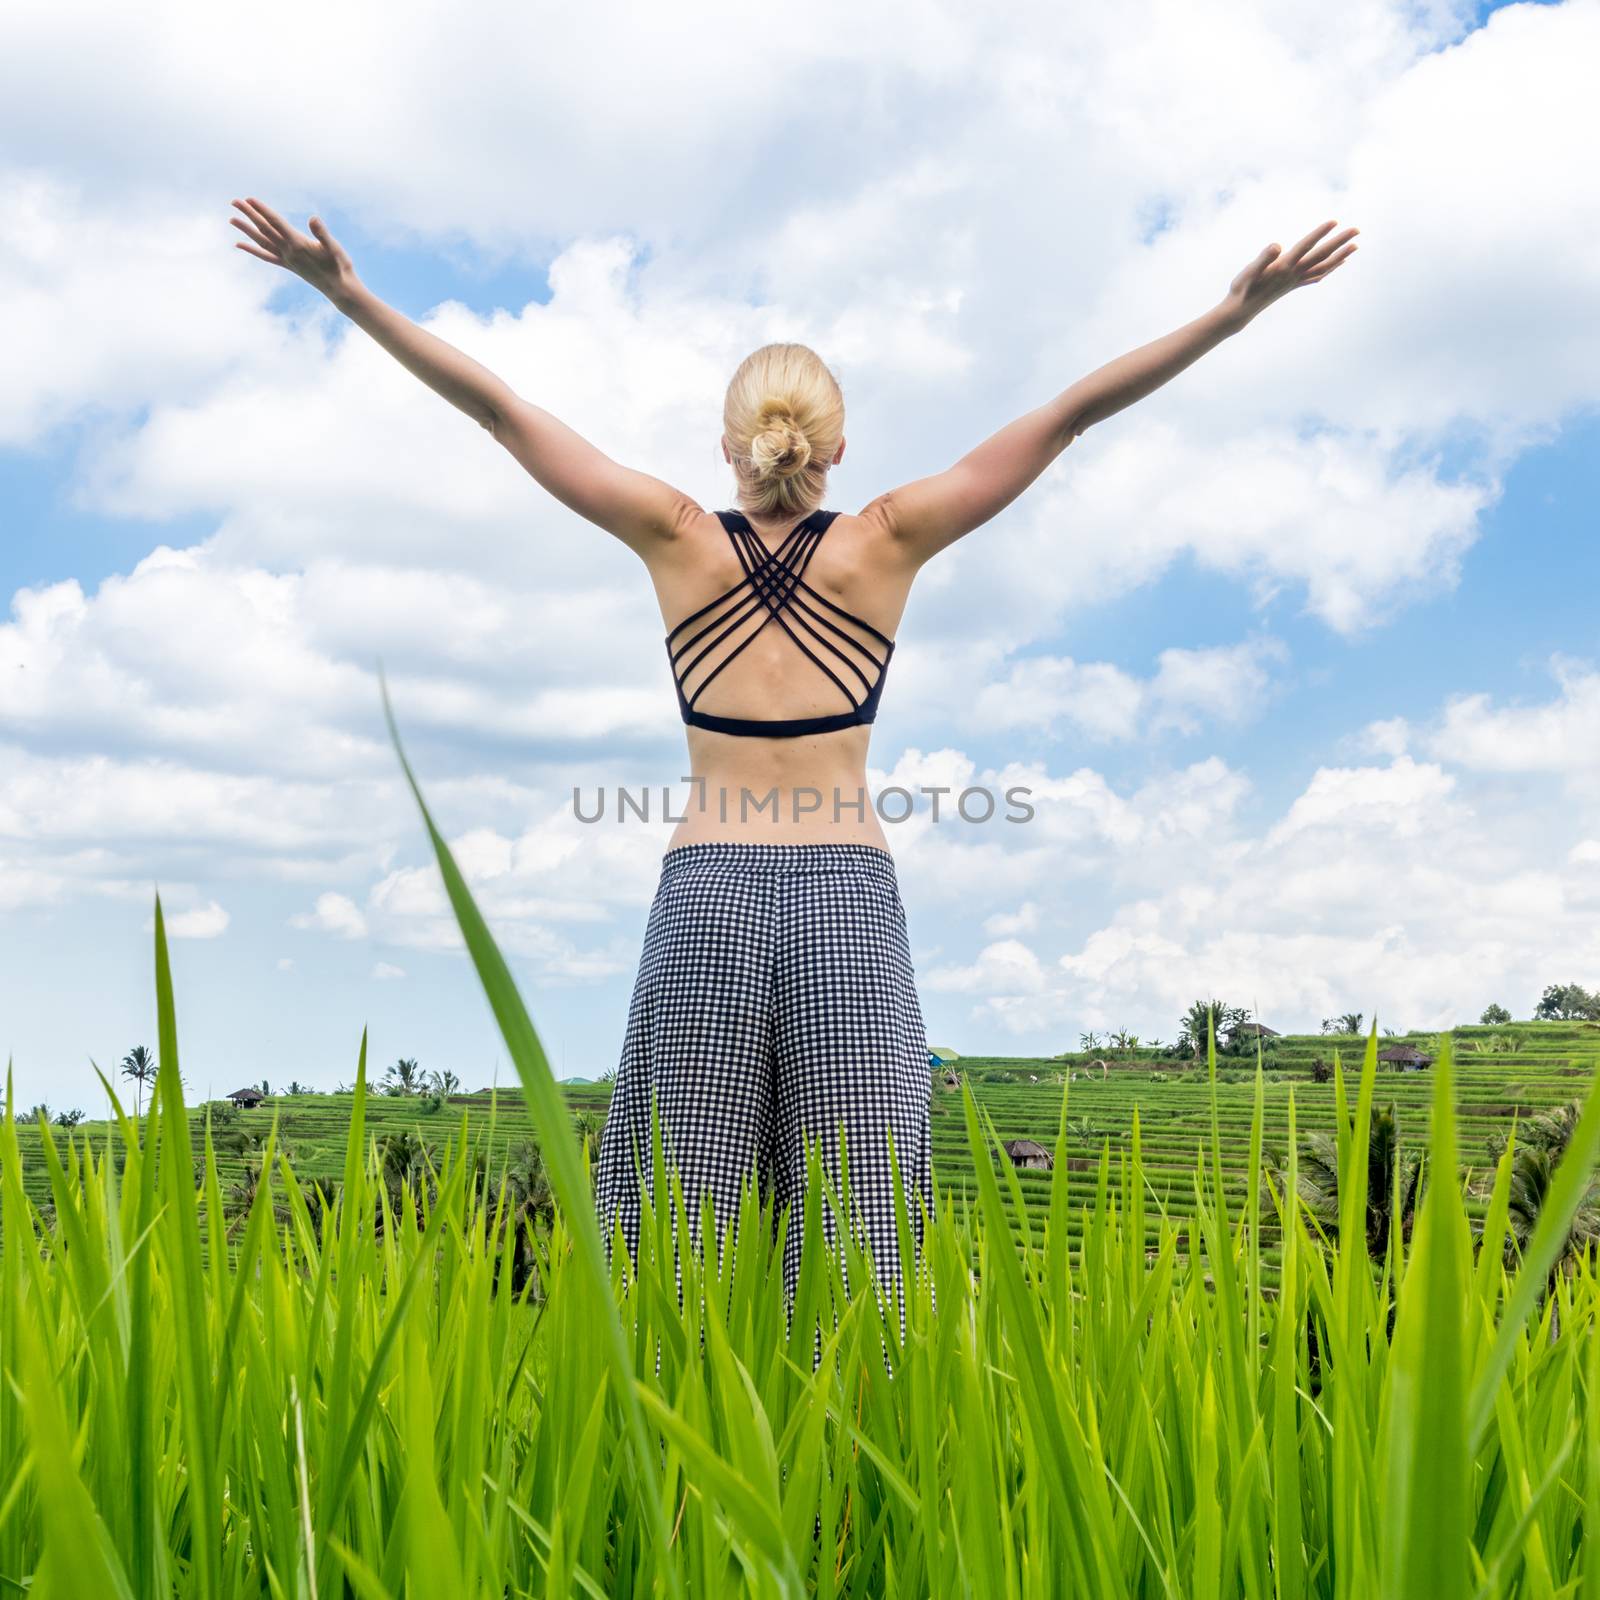 Relaxed woman, arms rised, enjoying pure nature at beautiful green rice fields on Bali. Concept of nature enjoyment, balanced life, freedom, vacations, happiness, and well being.